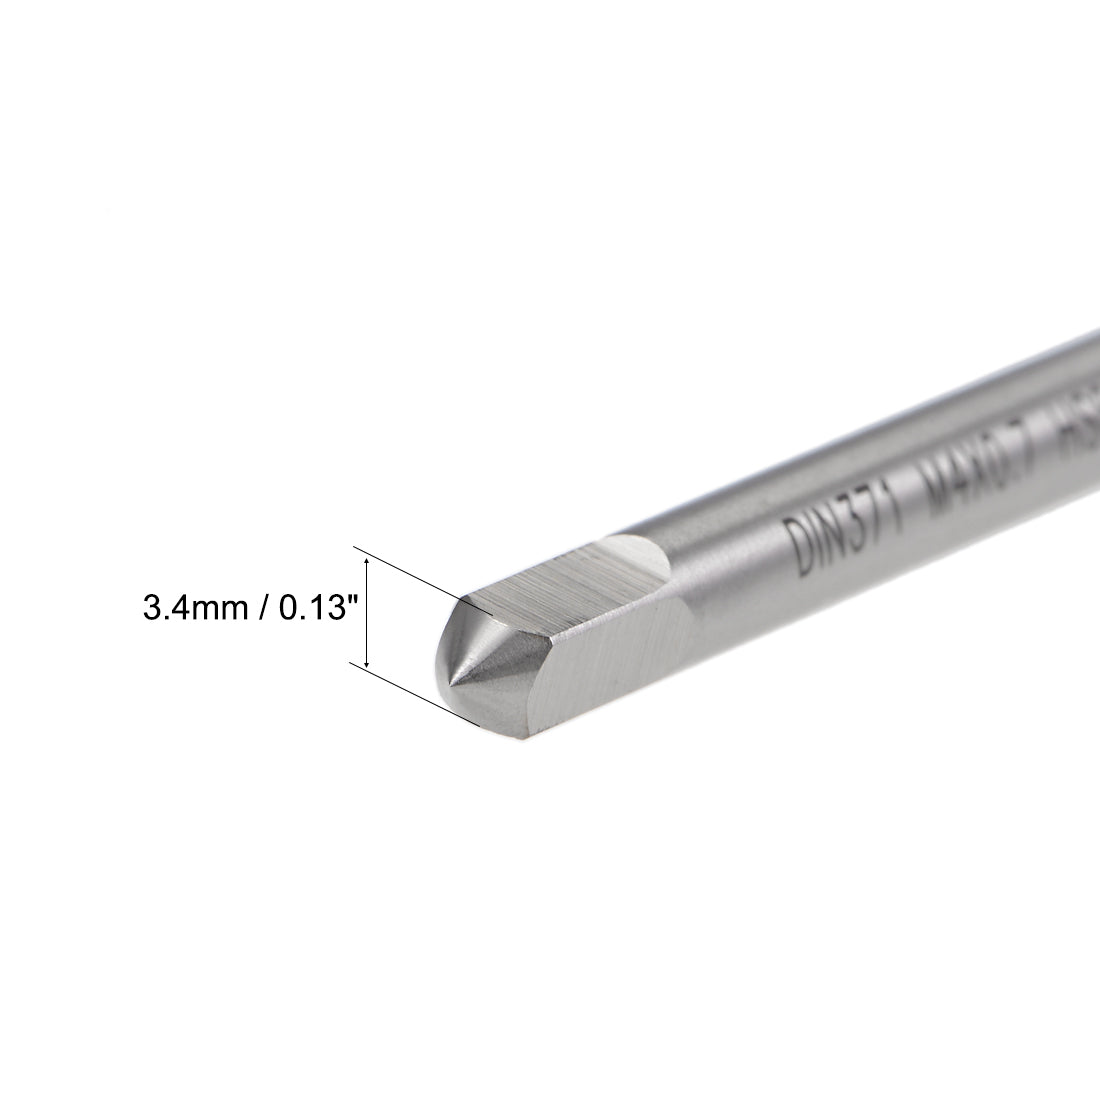 uxcell Uxcell M4 x 0.7 Spiral Point Threading Tap H2 Tolerance High Speed Steel Uncoated 2pcs